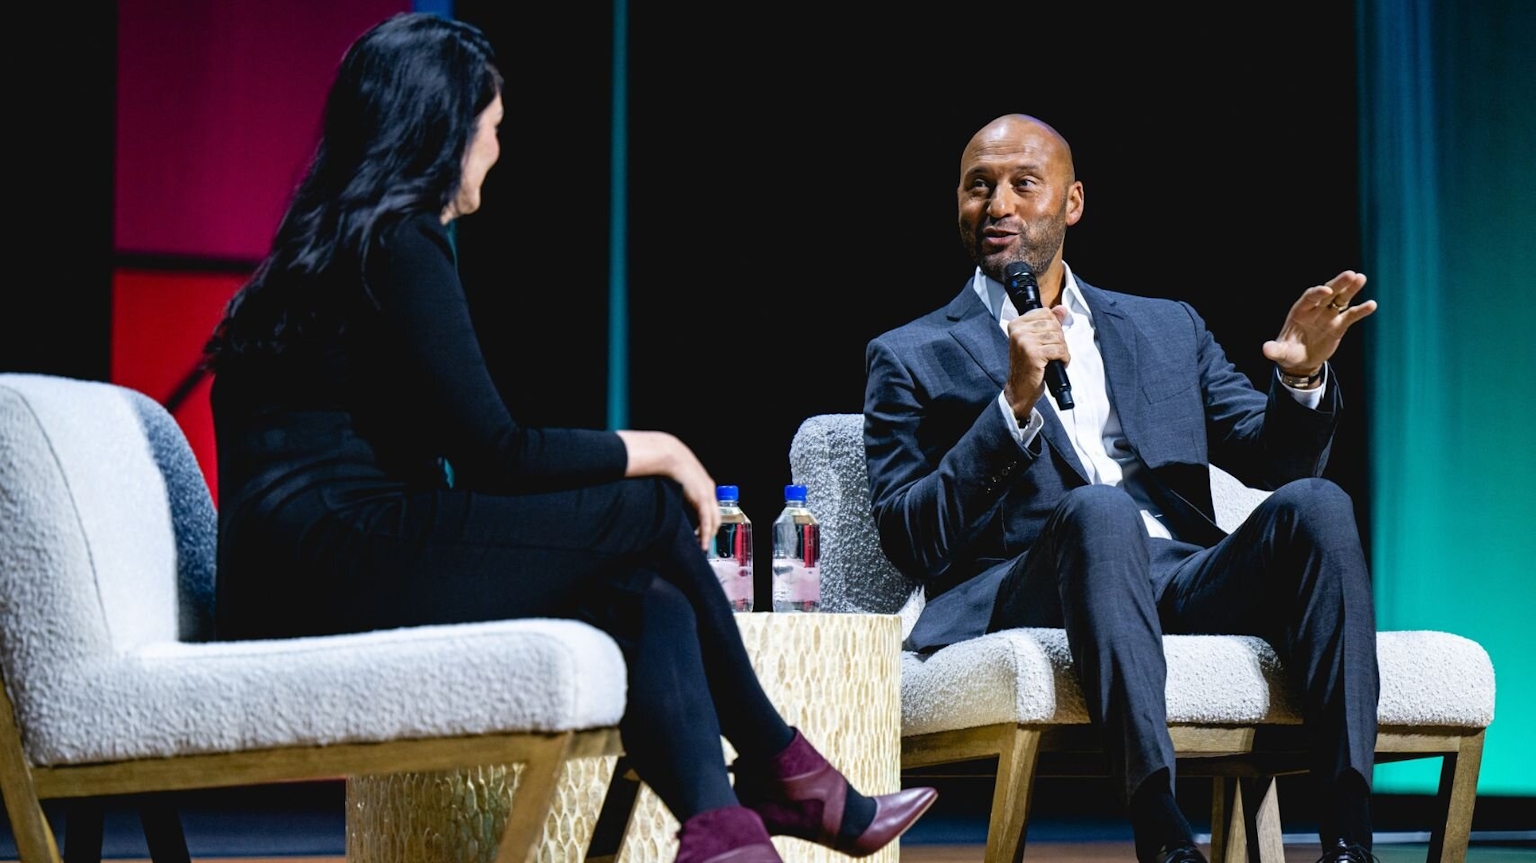 Two people in conversation on stage.